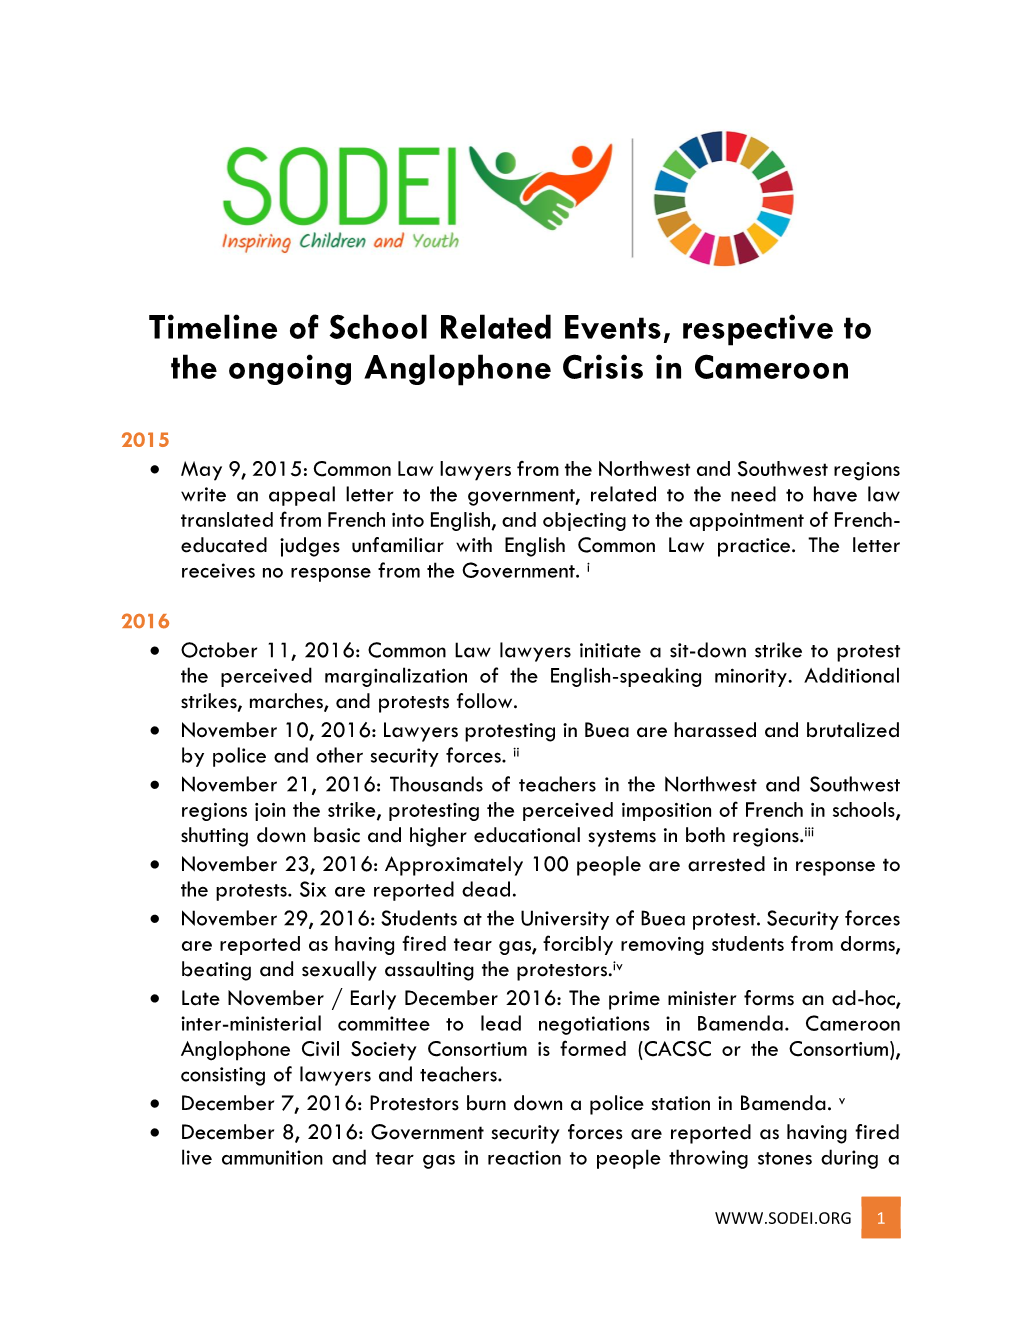 Timeline of School Related Events, Respective to the Ongoing Anglophone Crisis in Cameroon